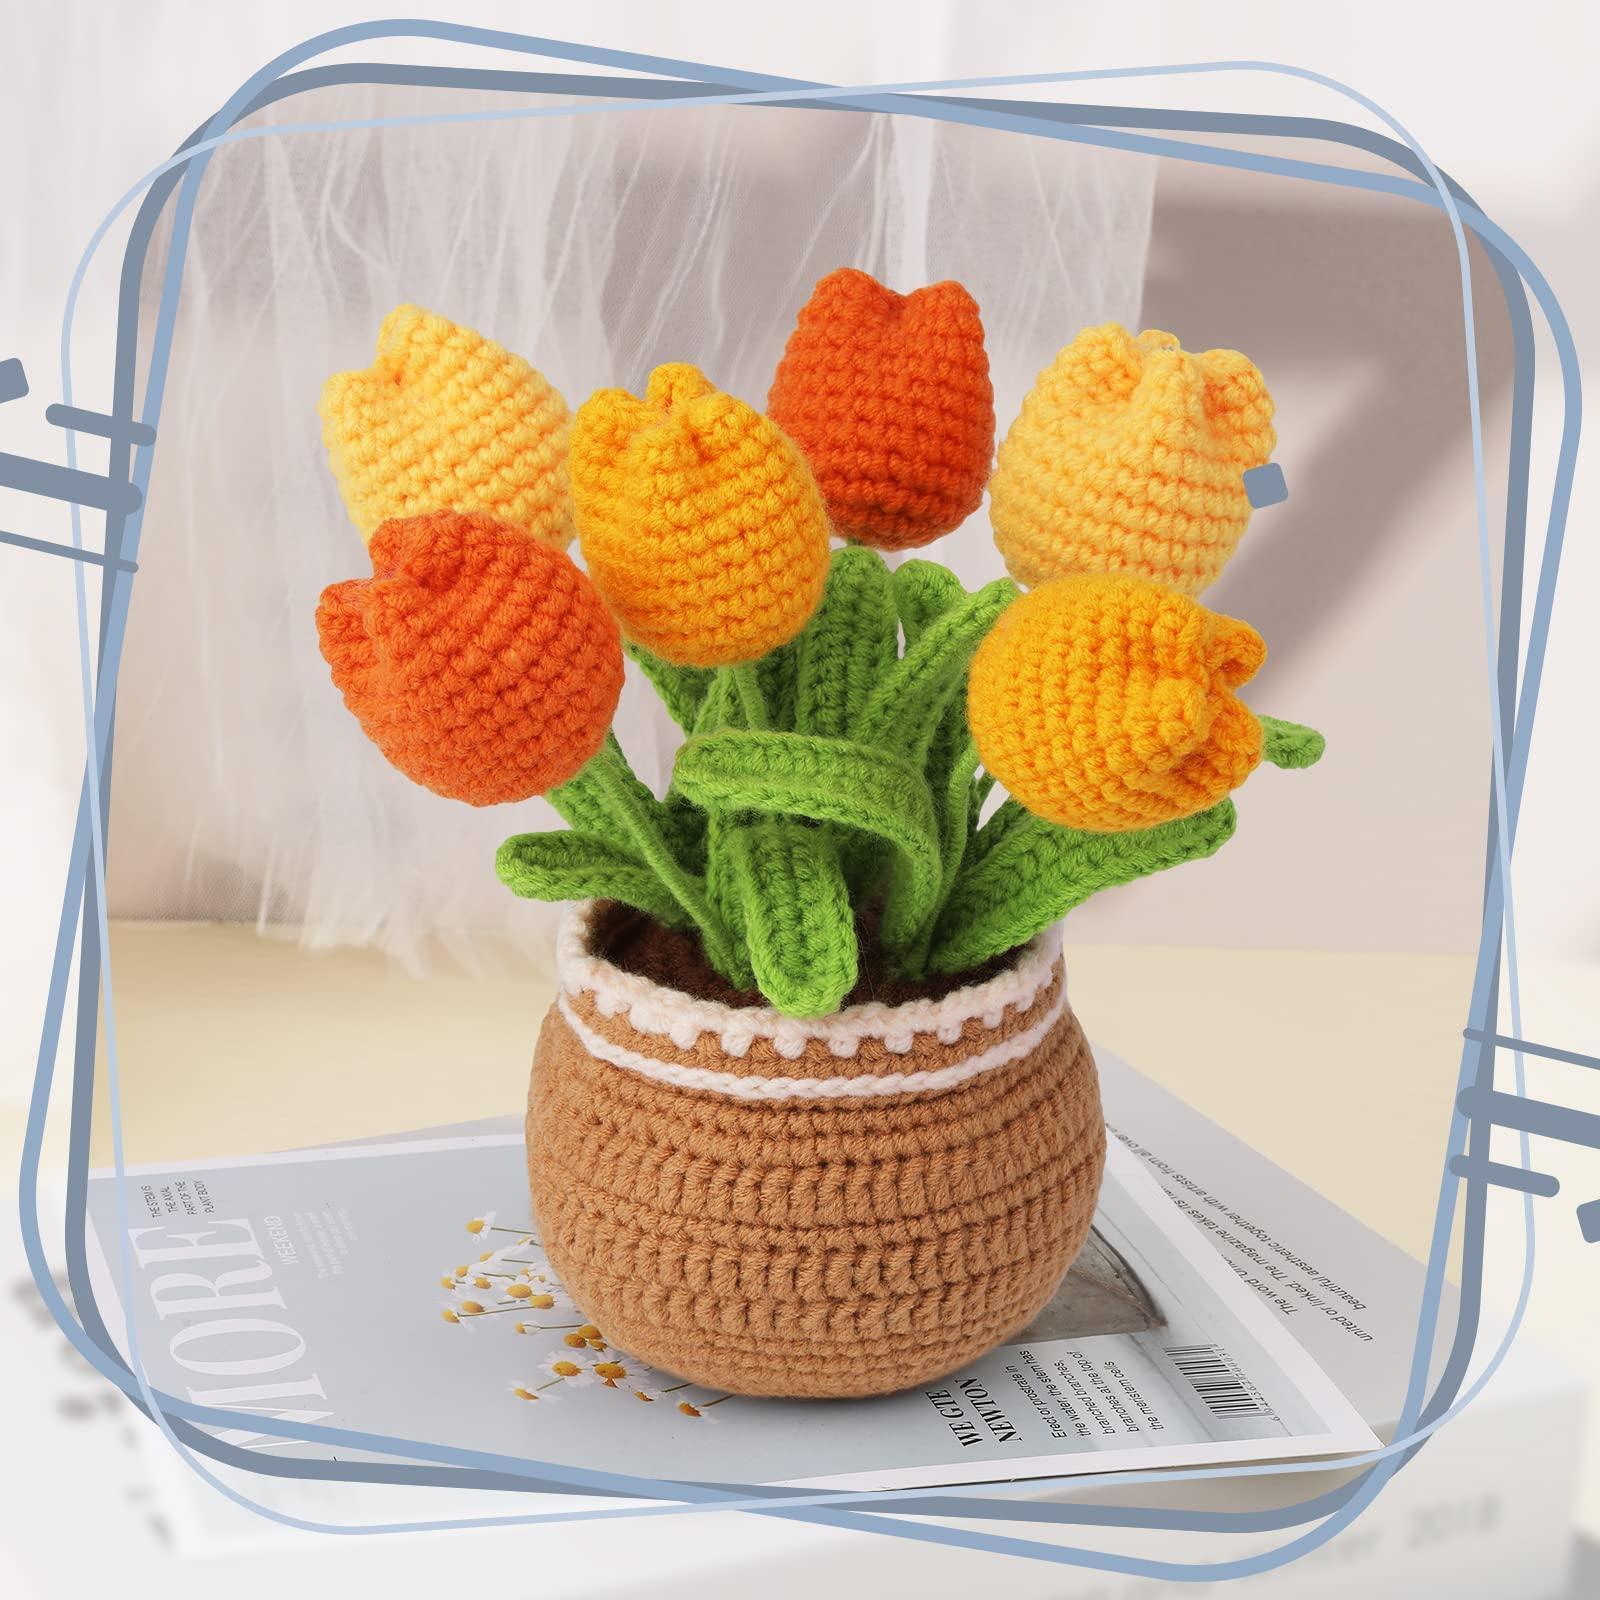 Ideashop Crochet Kit for Beginners, Tulip Potted Plants Crochet Kit,  Crochet Starter Kit for Adults and Kids, Learn to Crochet Kits with  Step-by-Step